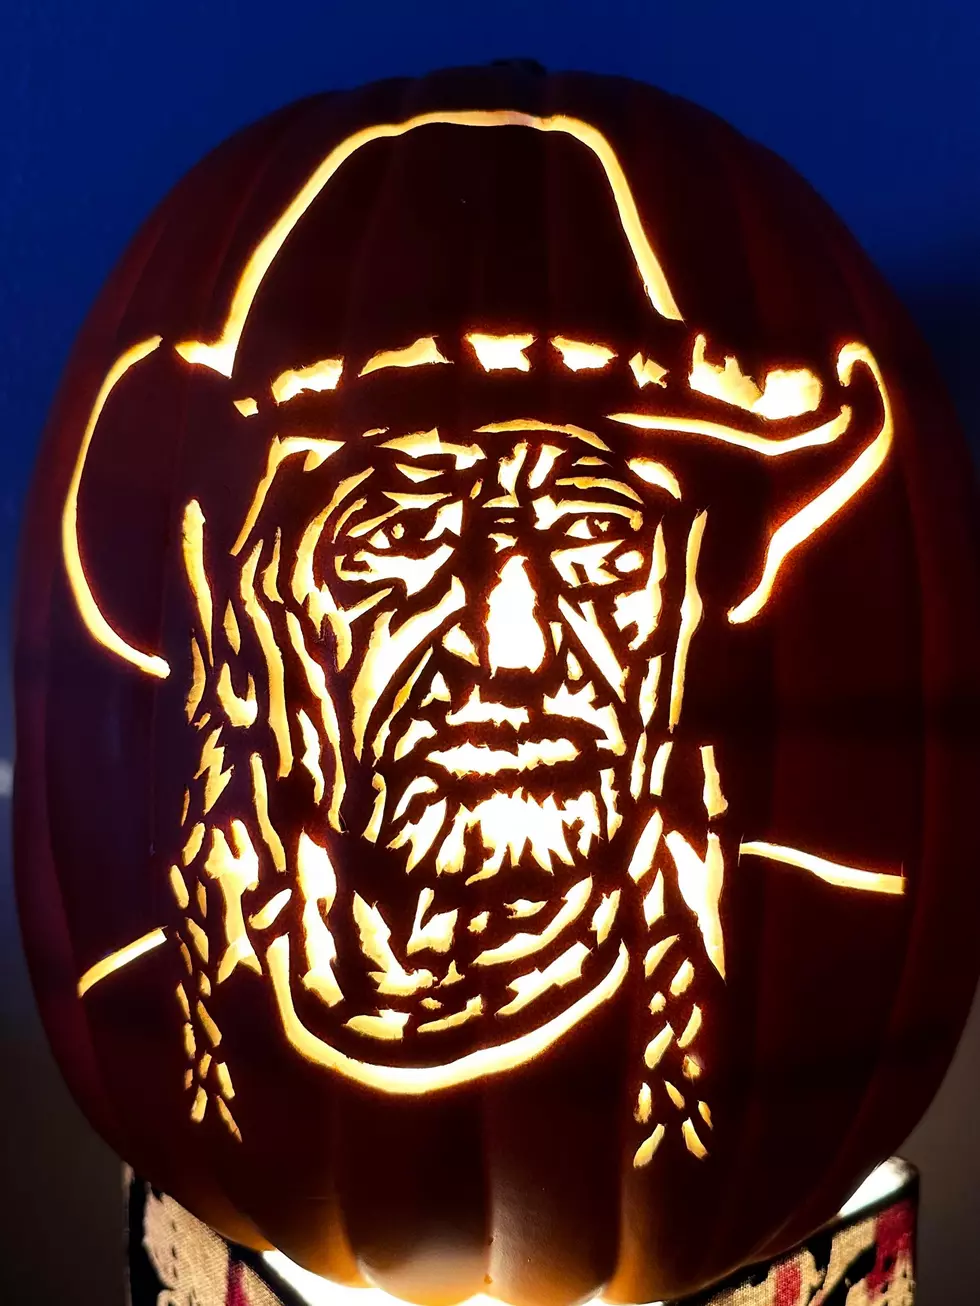 Lubbock Man Carves Another Patch of Incredible Pumpkins